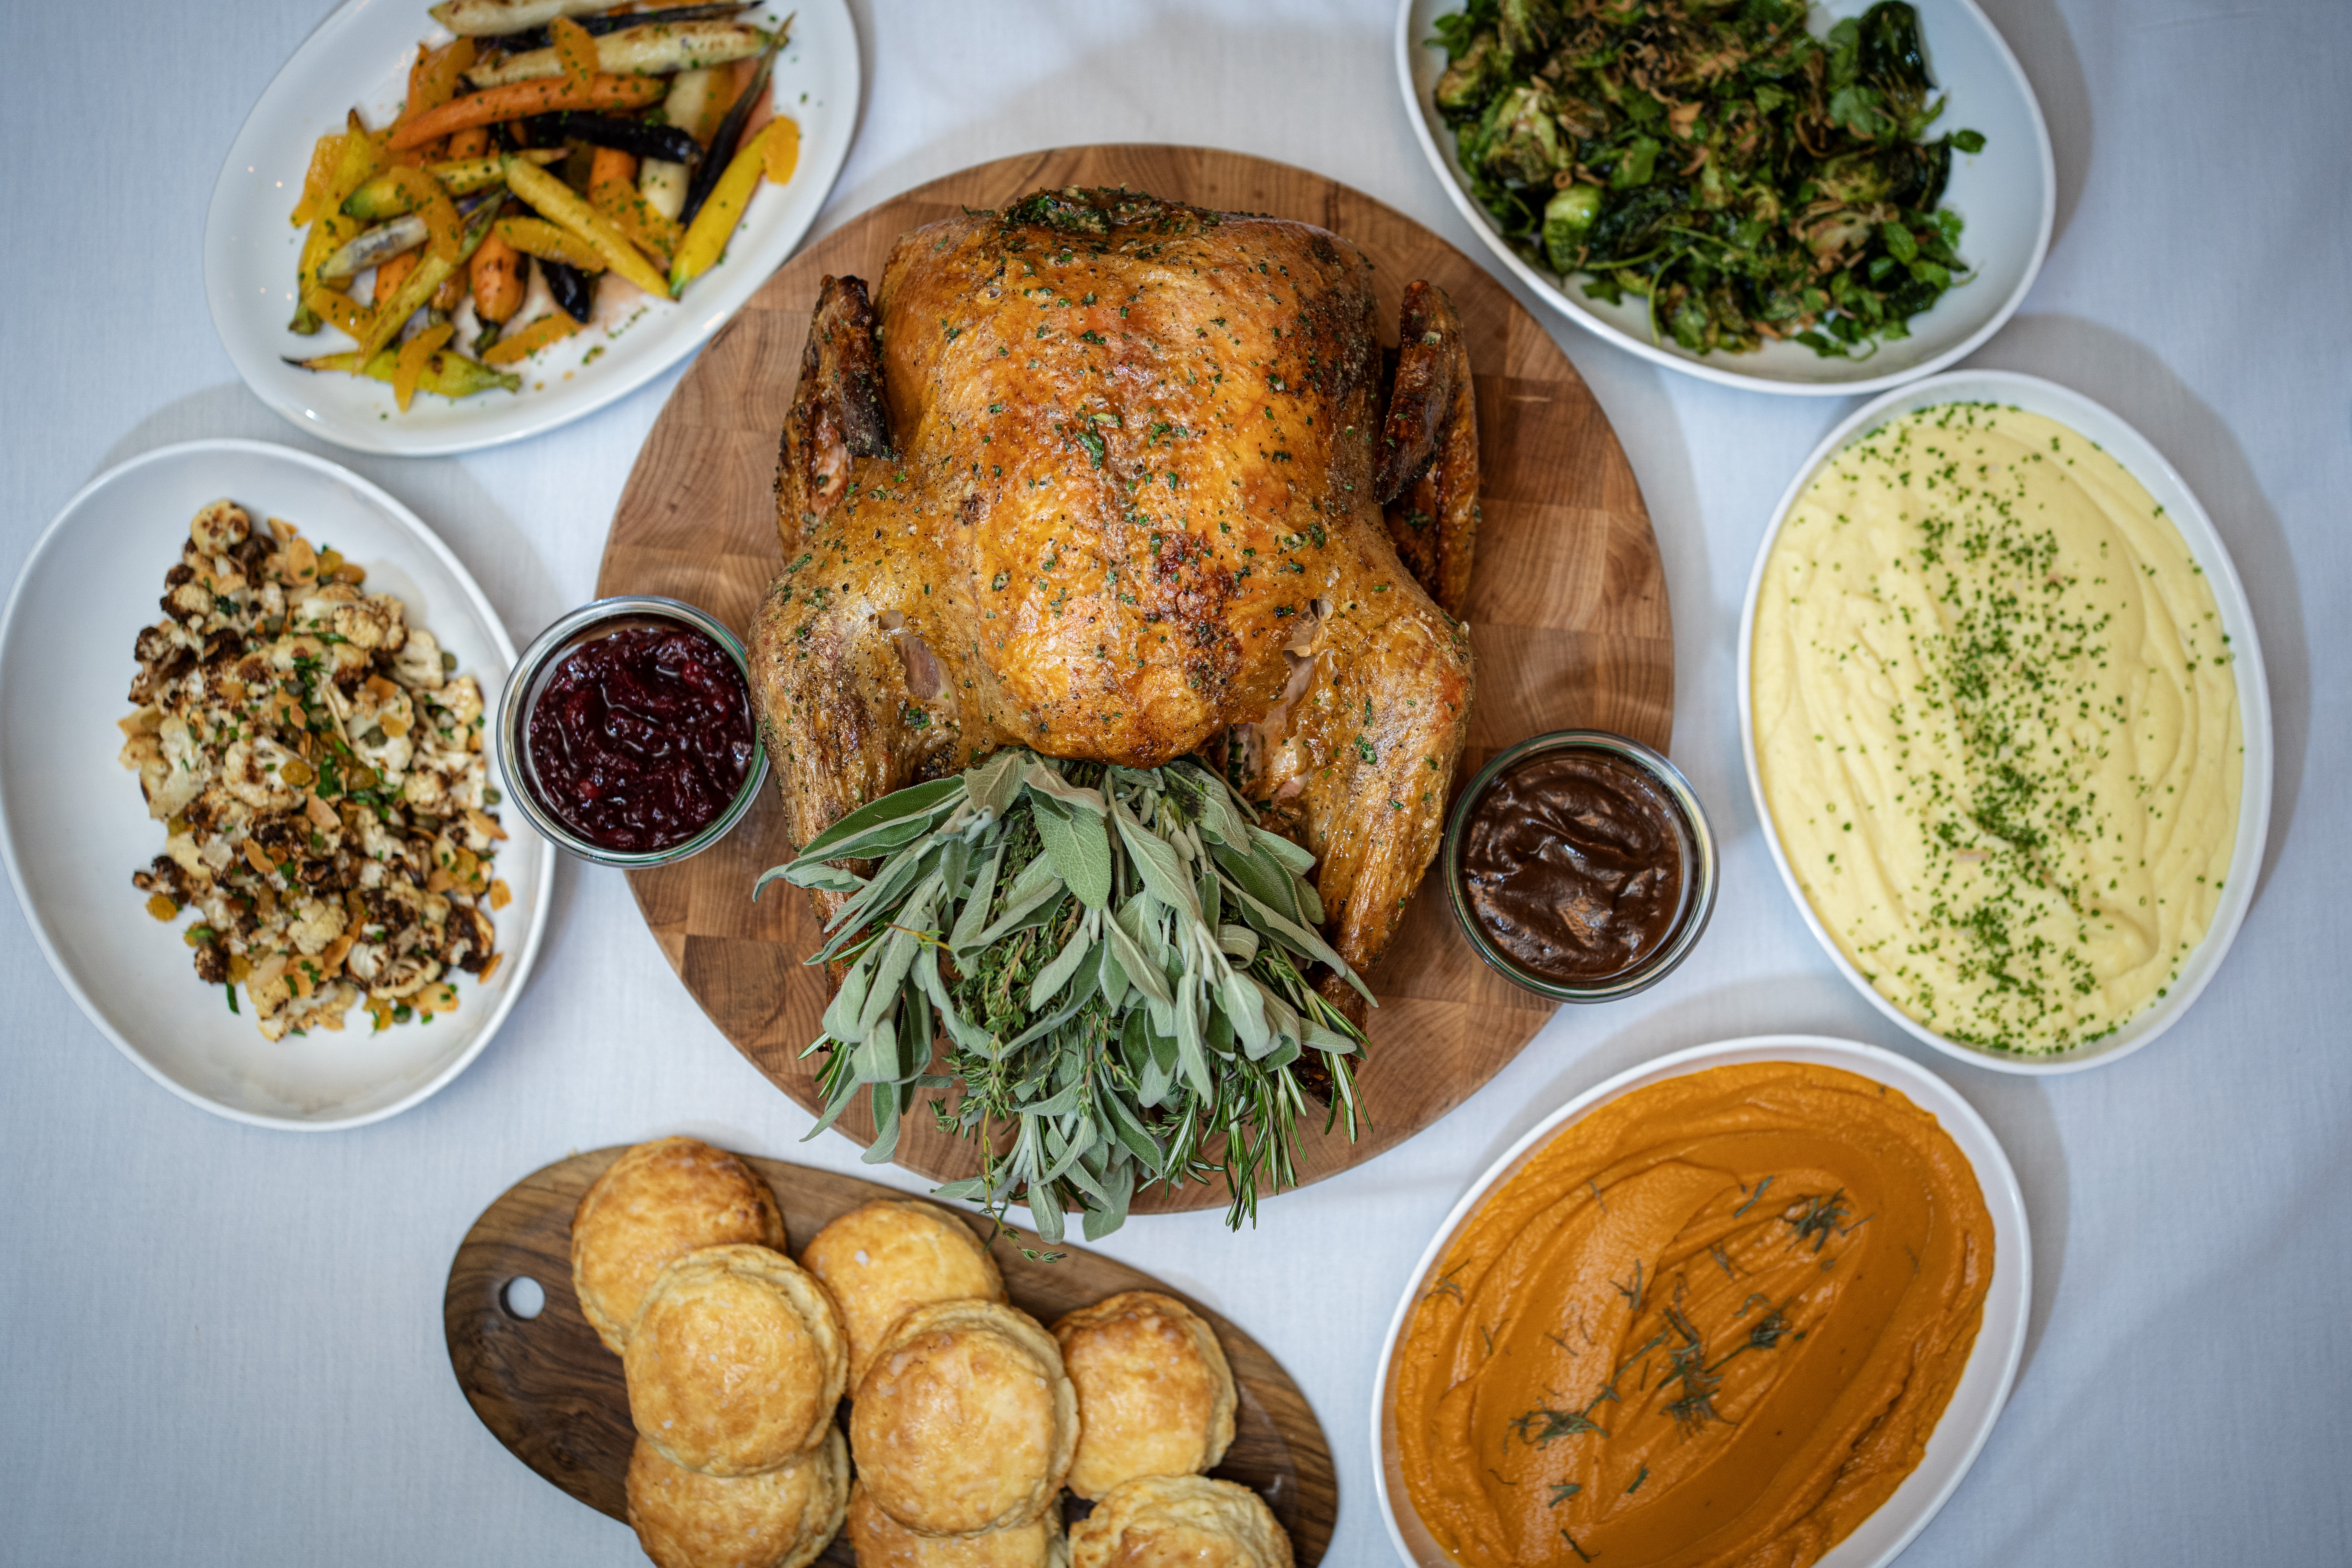 Where to Dine-In This Thanksgiving 🦃